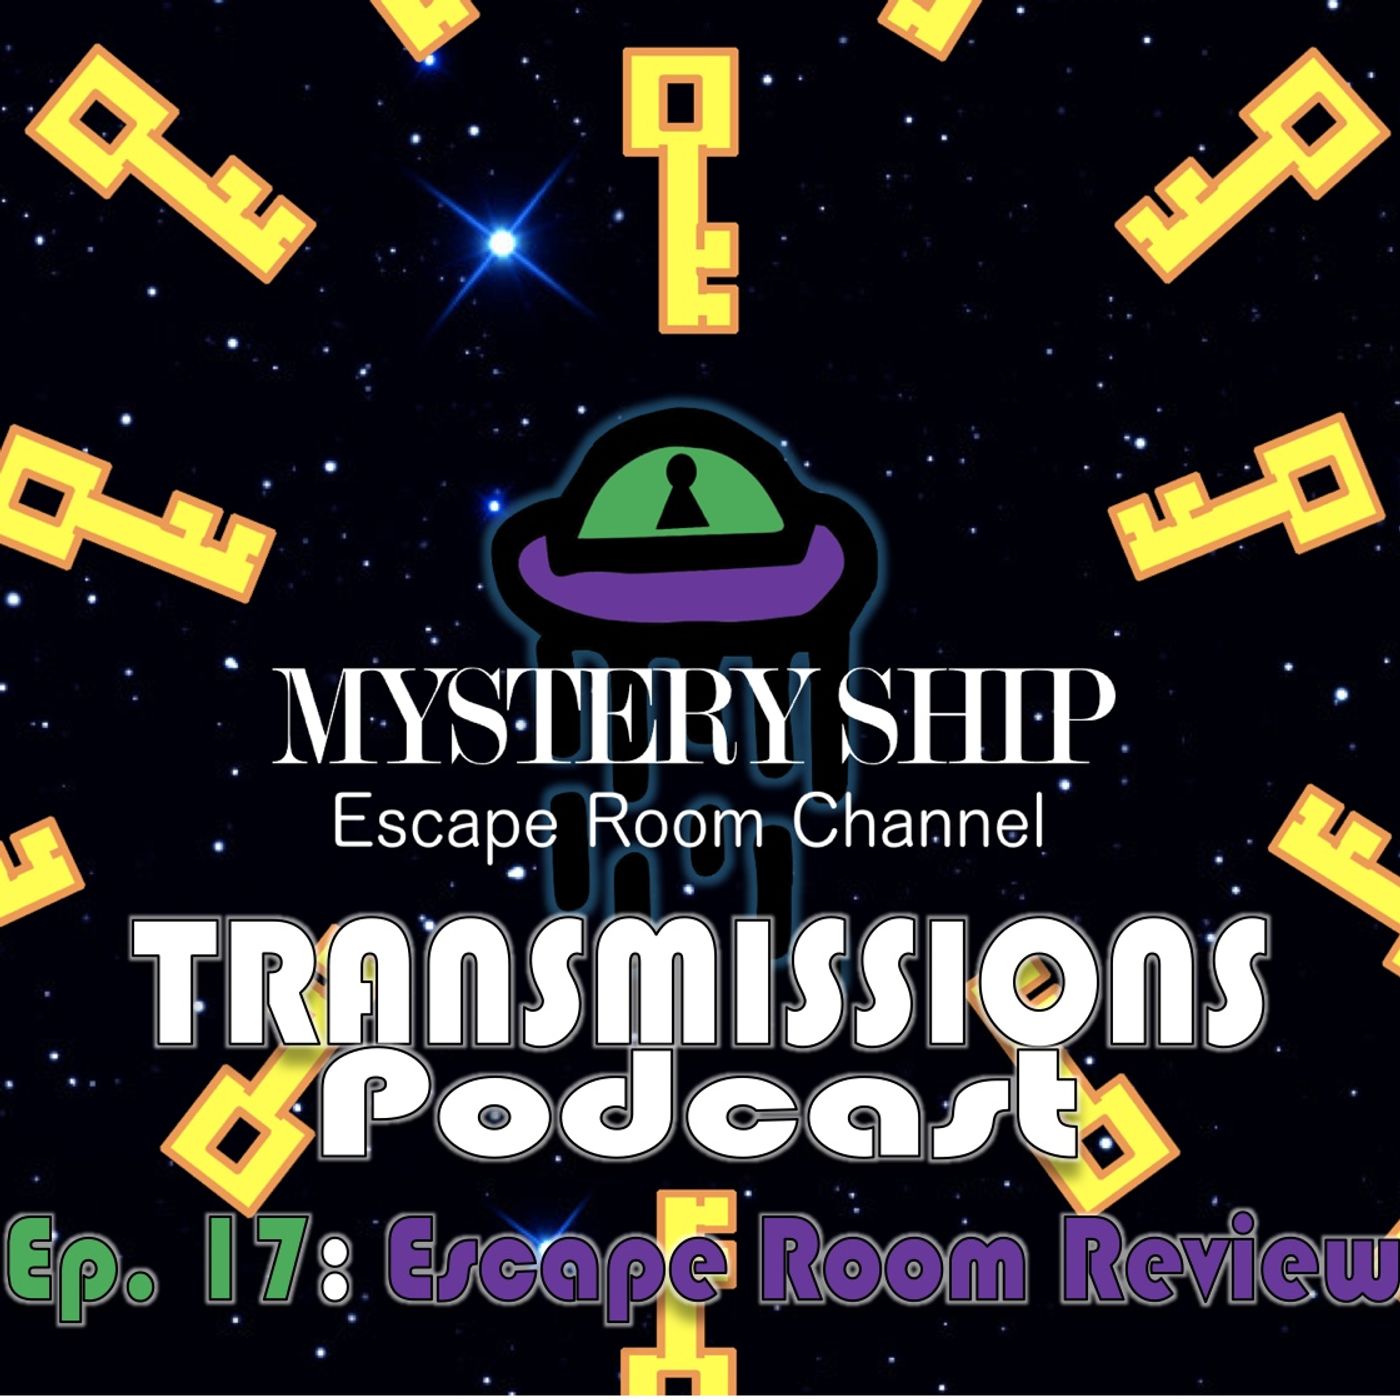 Ep17 Escape Room Review: Secret Mission by Maze Rooms Los Angeles - Mystery Ship Transmissions Podcast